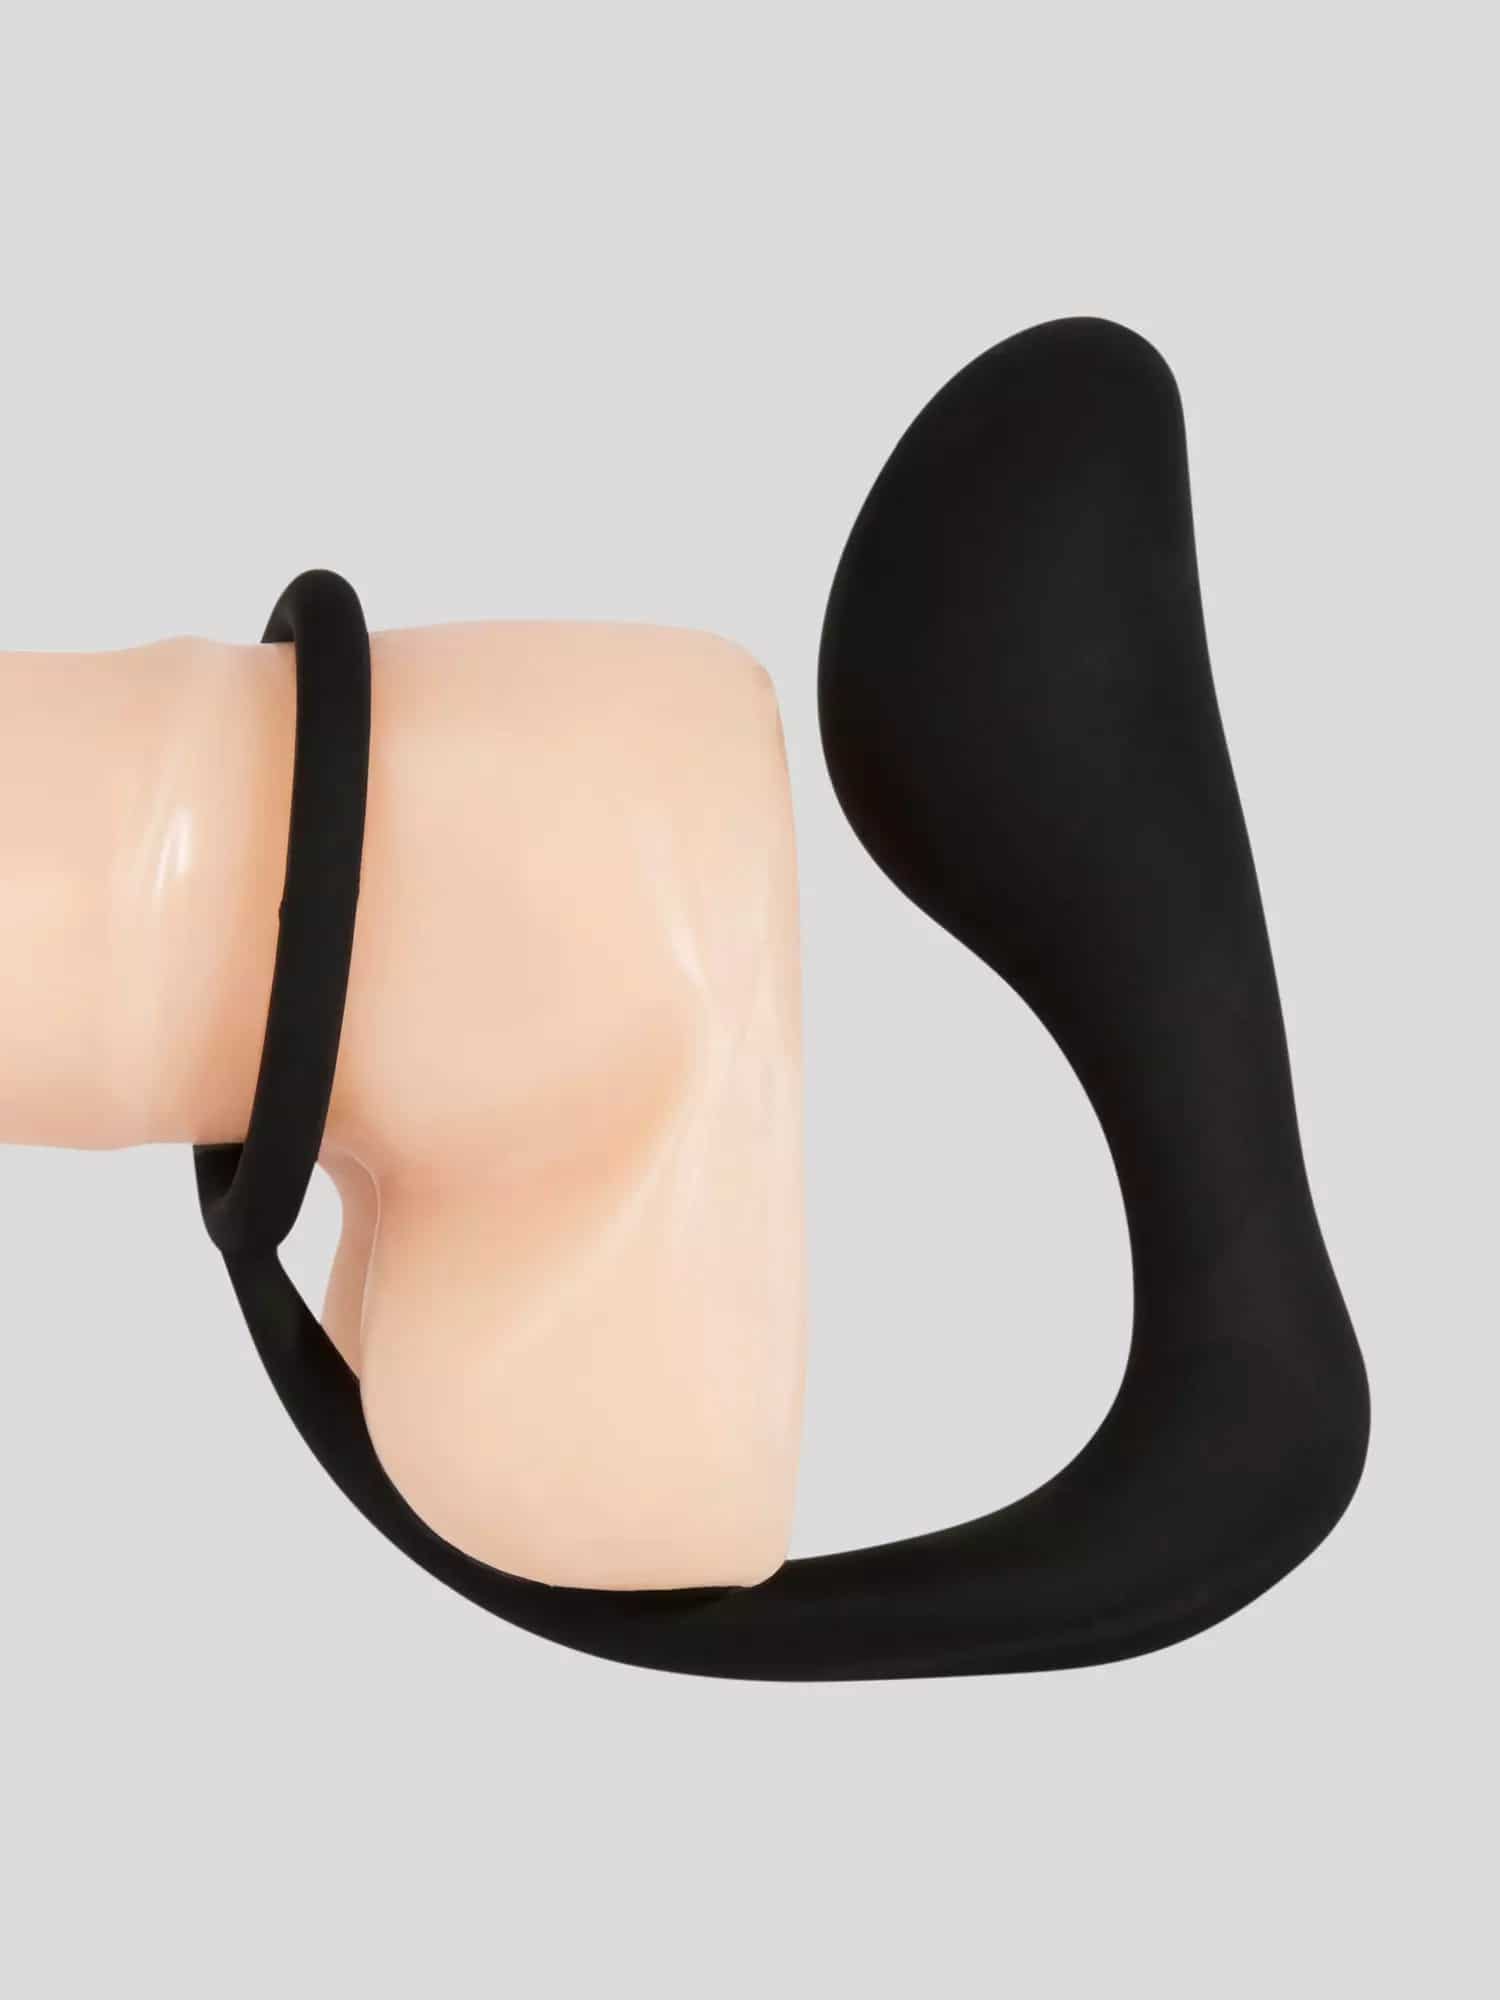 Lynk Plugged Cock Ring Prostate Massager. Slide 15